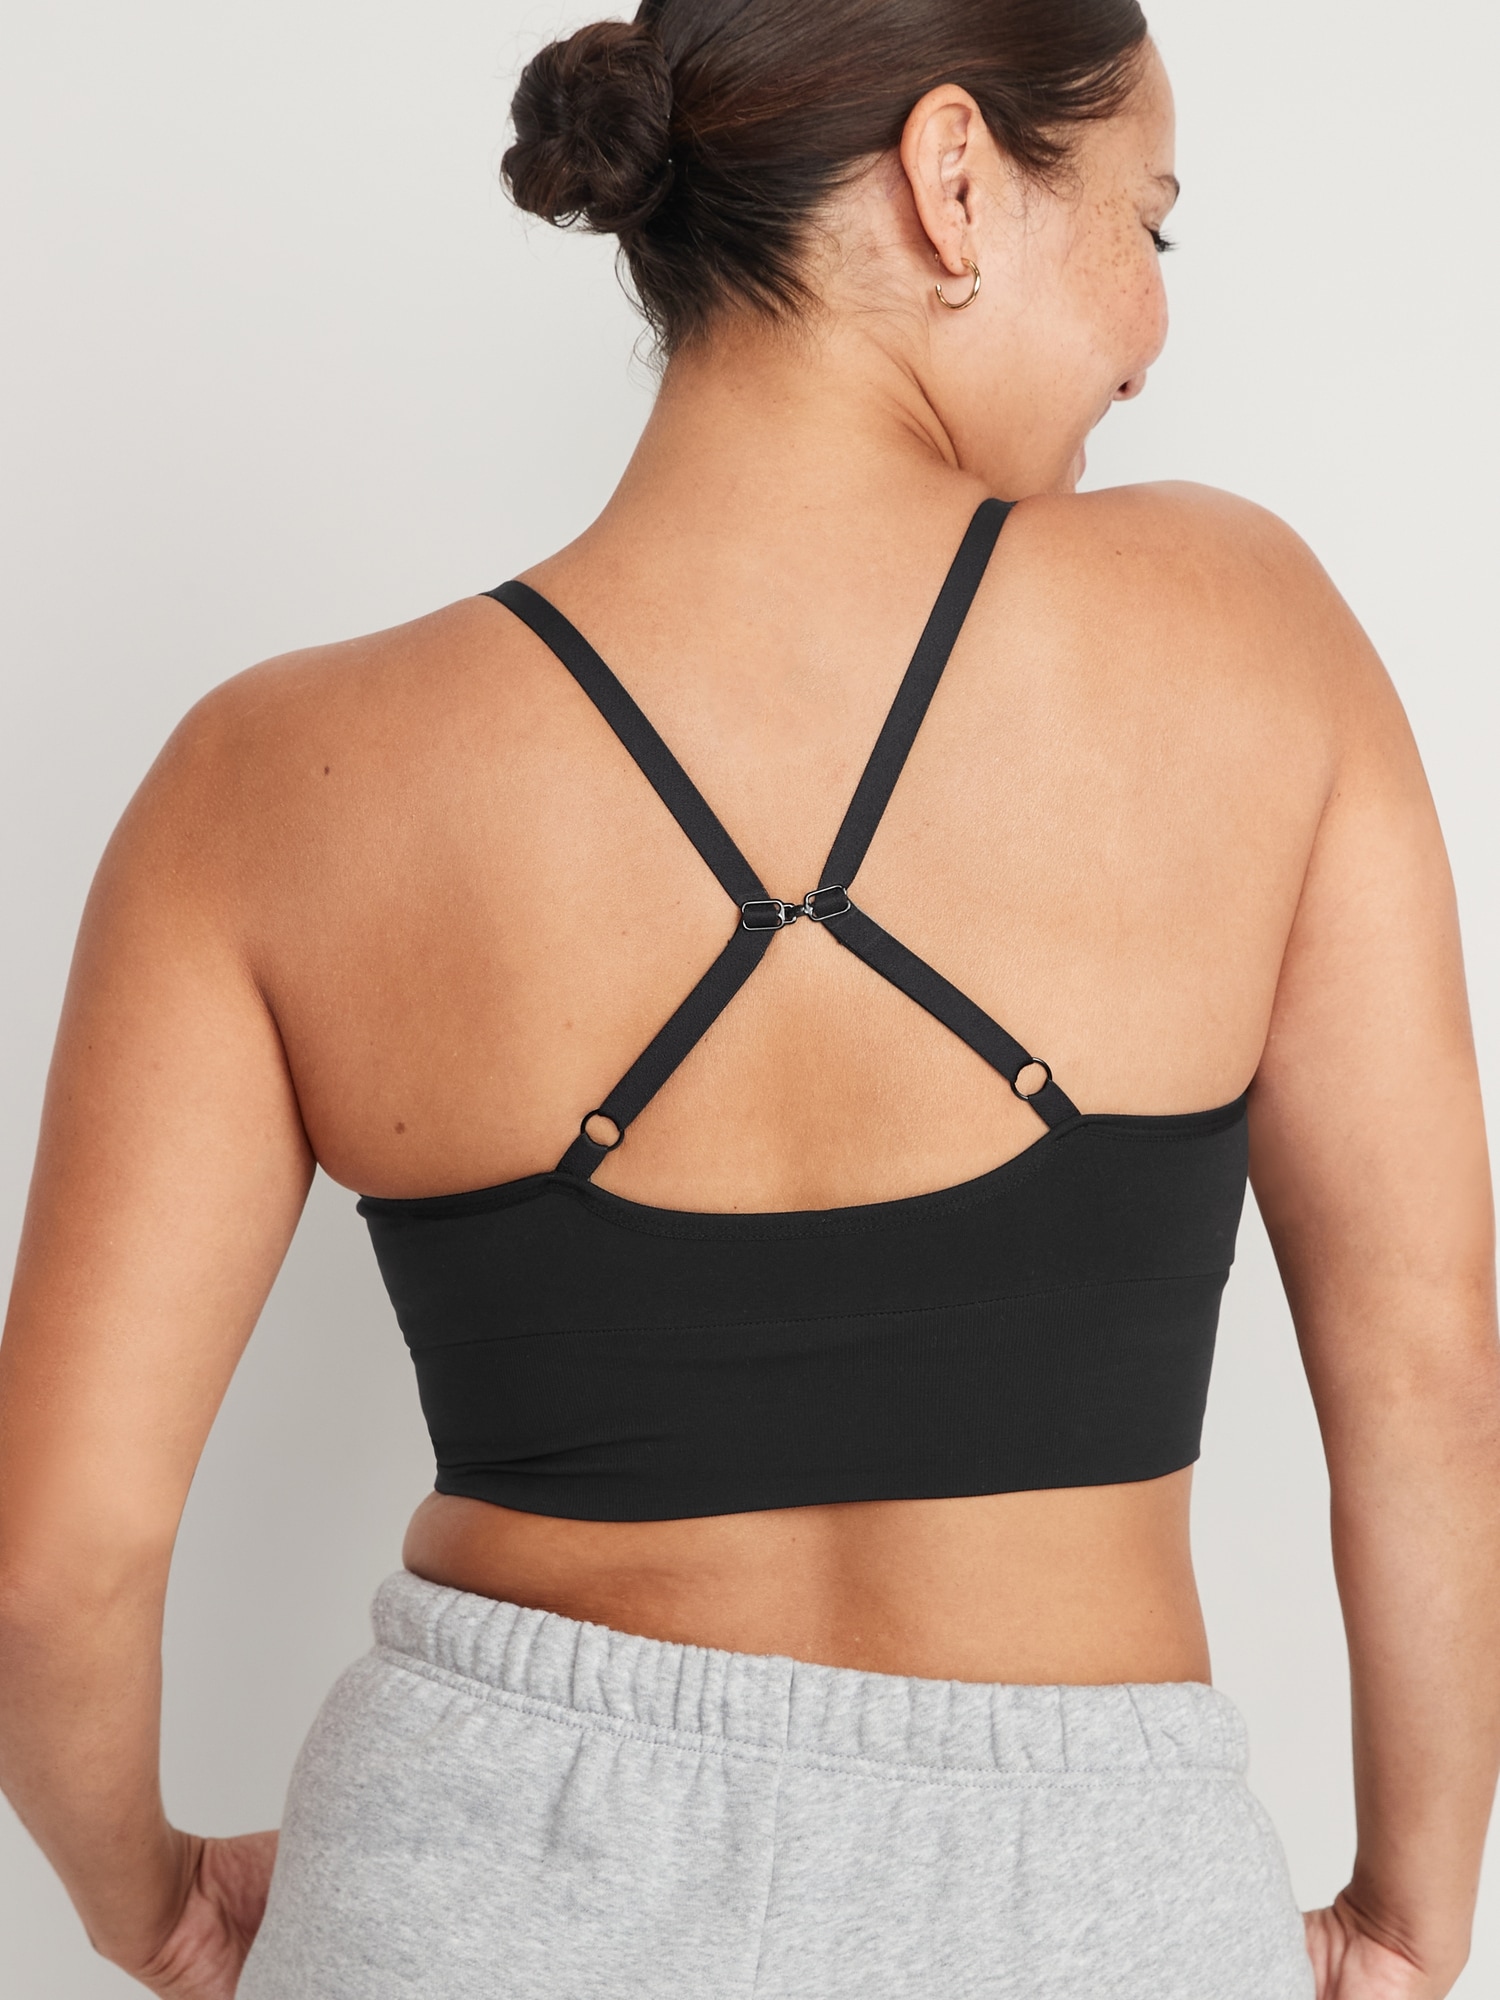 Pump Strap Hands-Free Pumping Bra Black One Size Fits Most